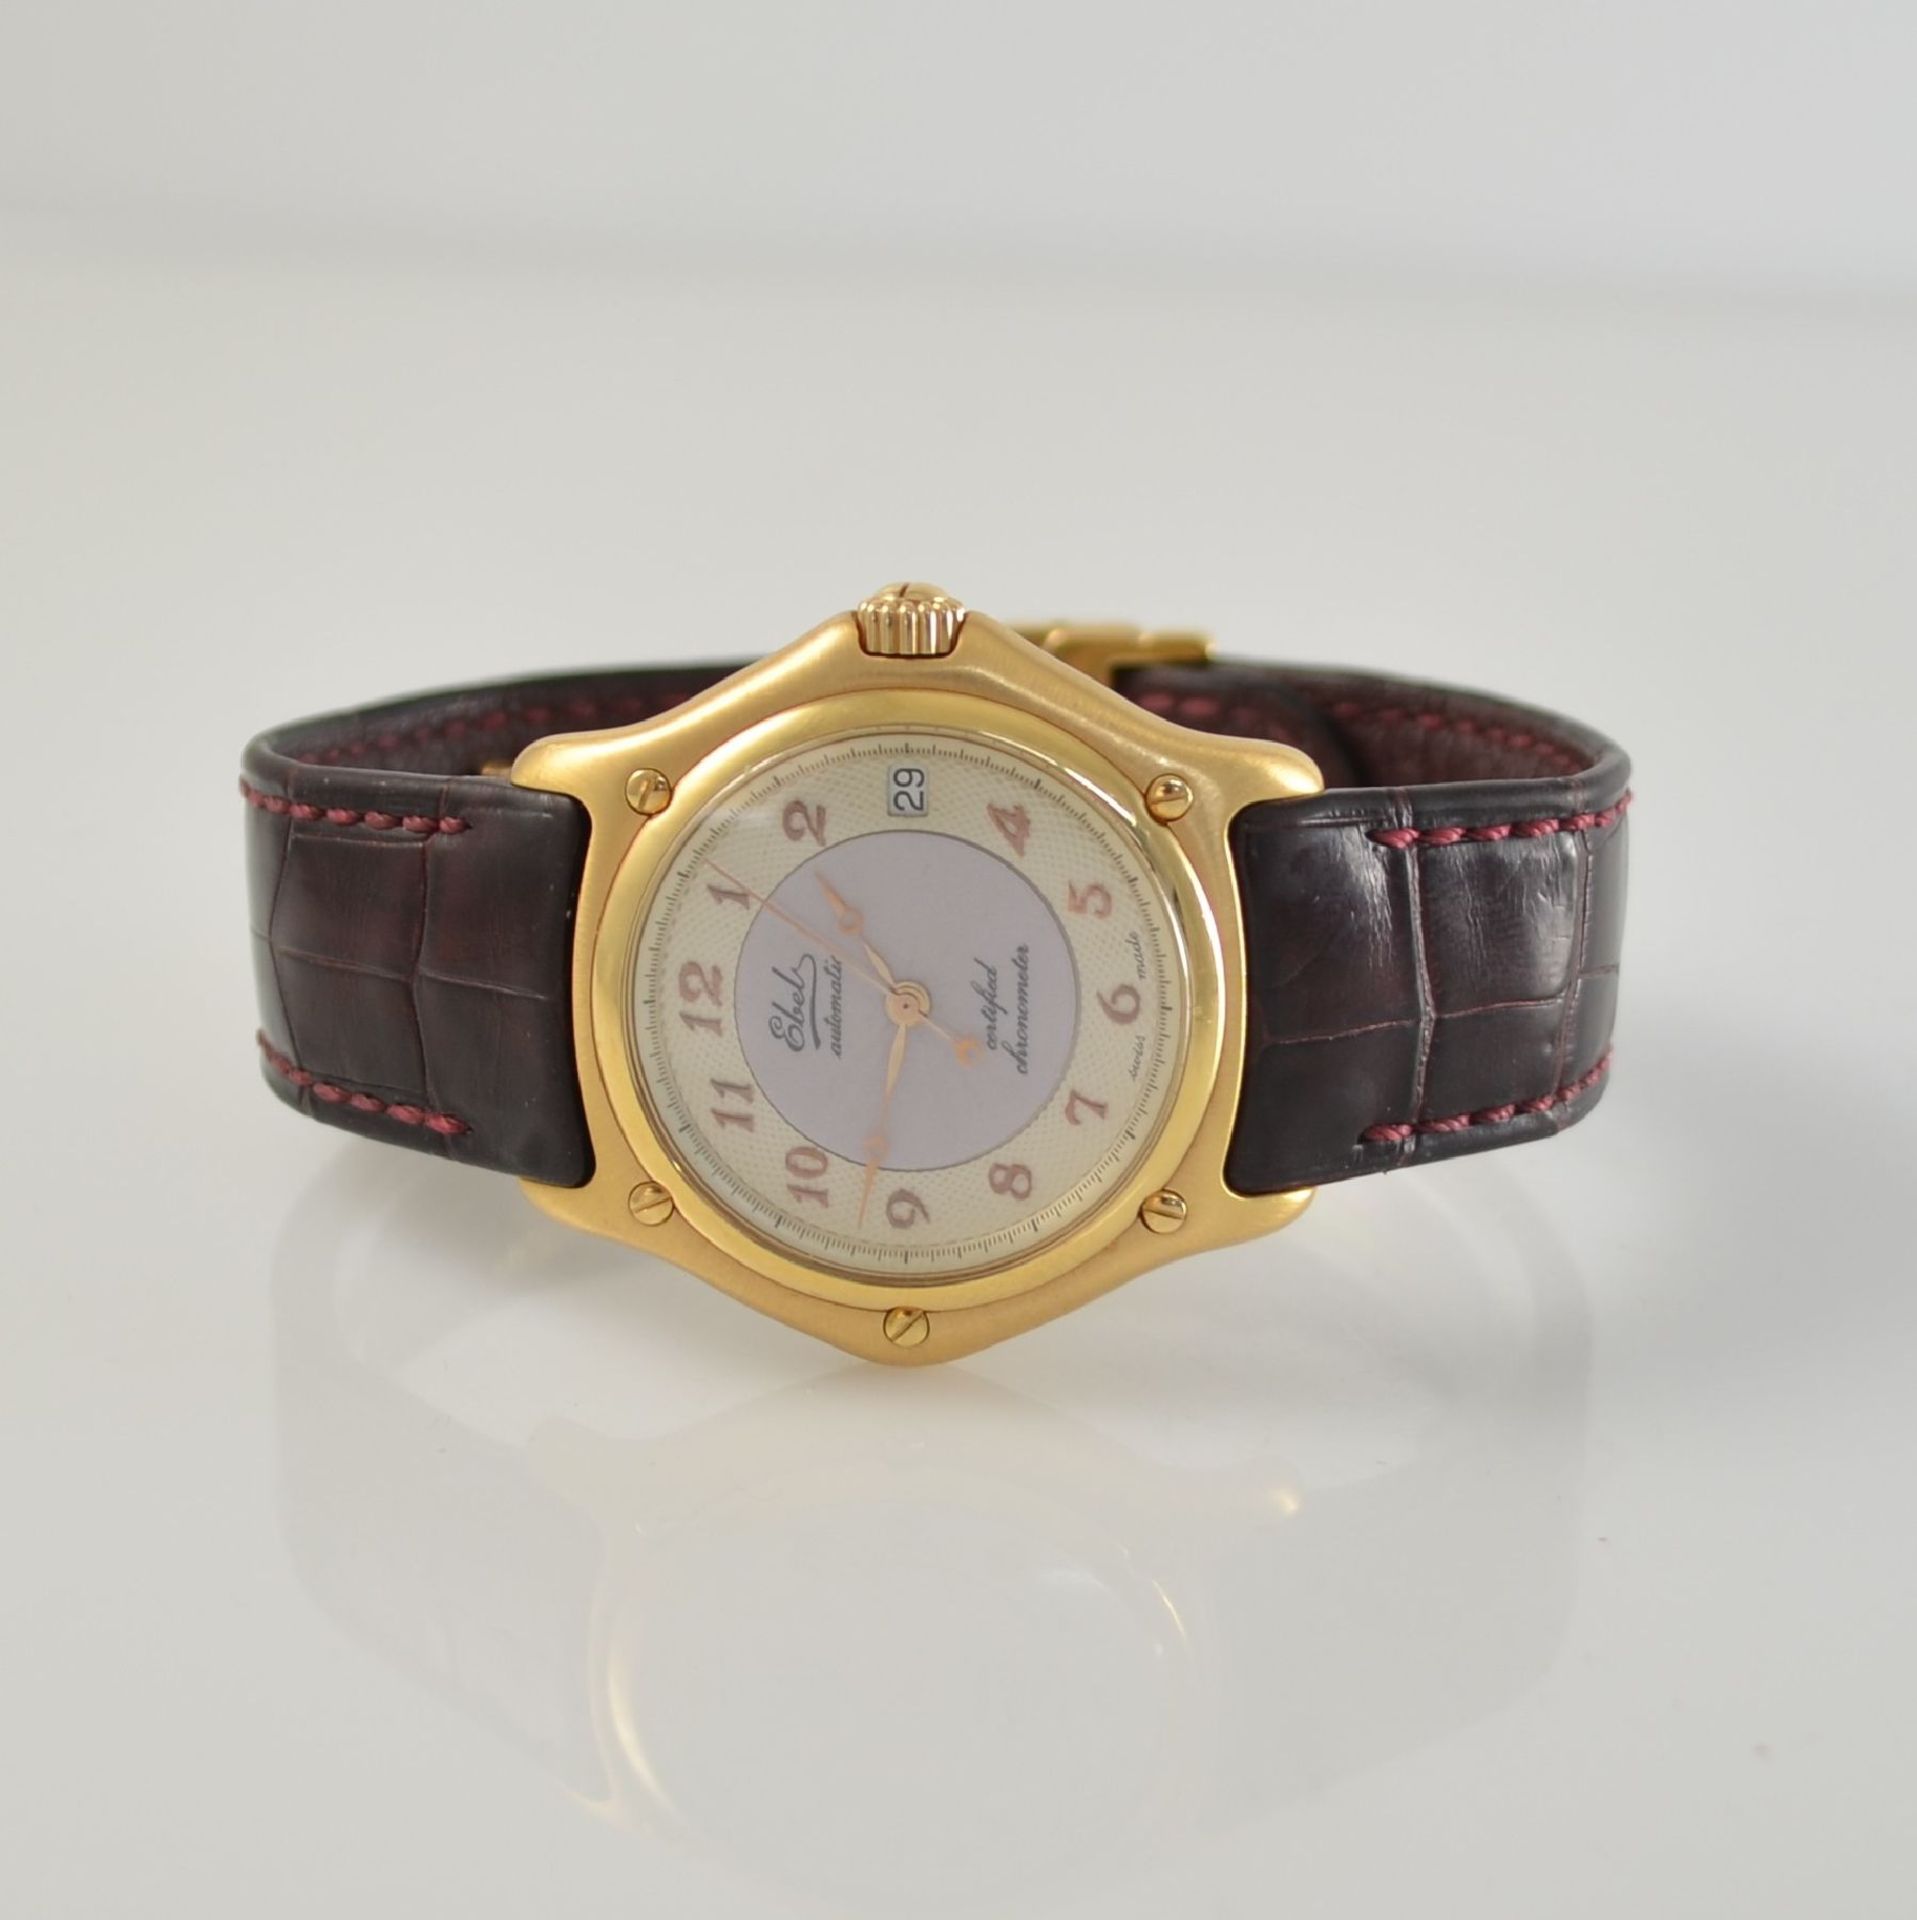 EBEL rare 18k pink gold gents wristwatch series 1911, self winding, chronometer made in a limited